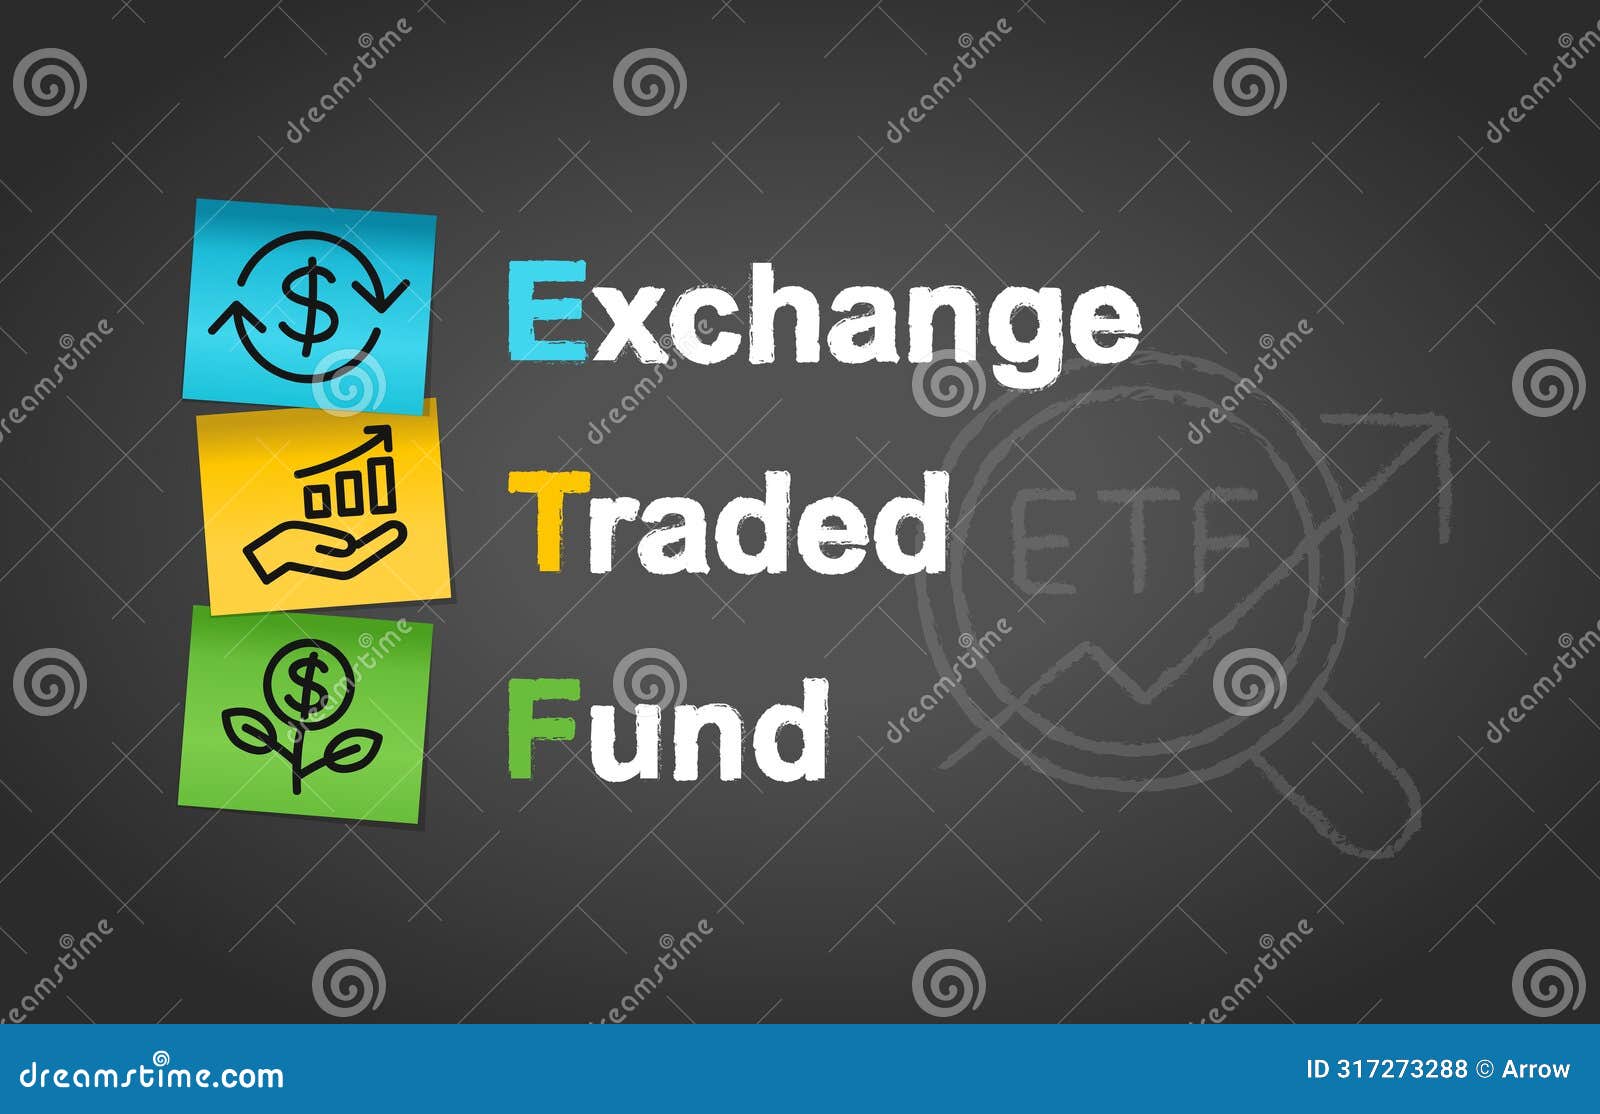 etf exchange traded fund investment post it notes infographic background